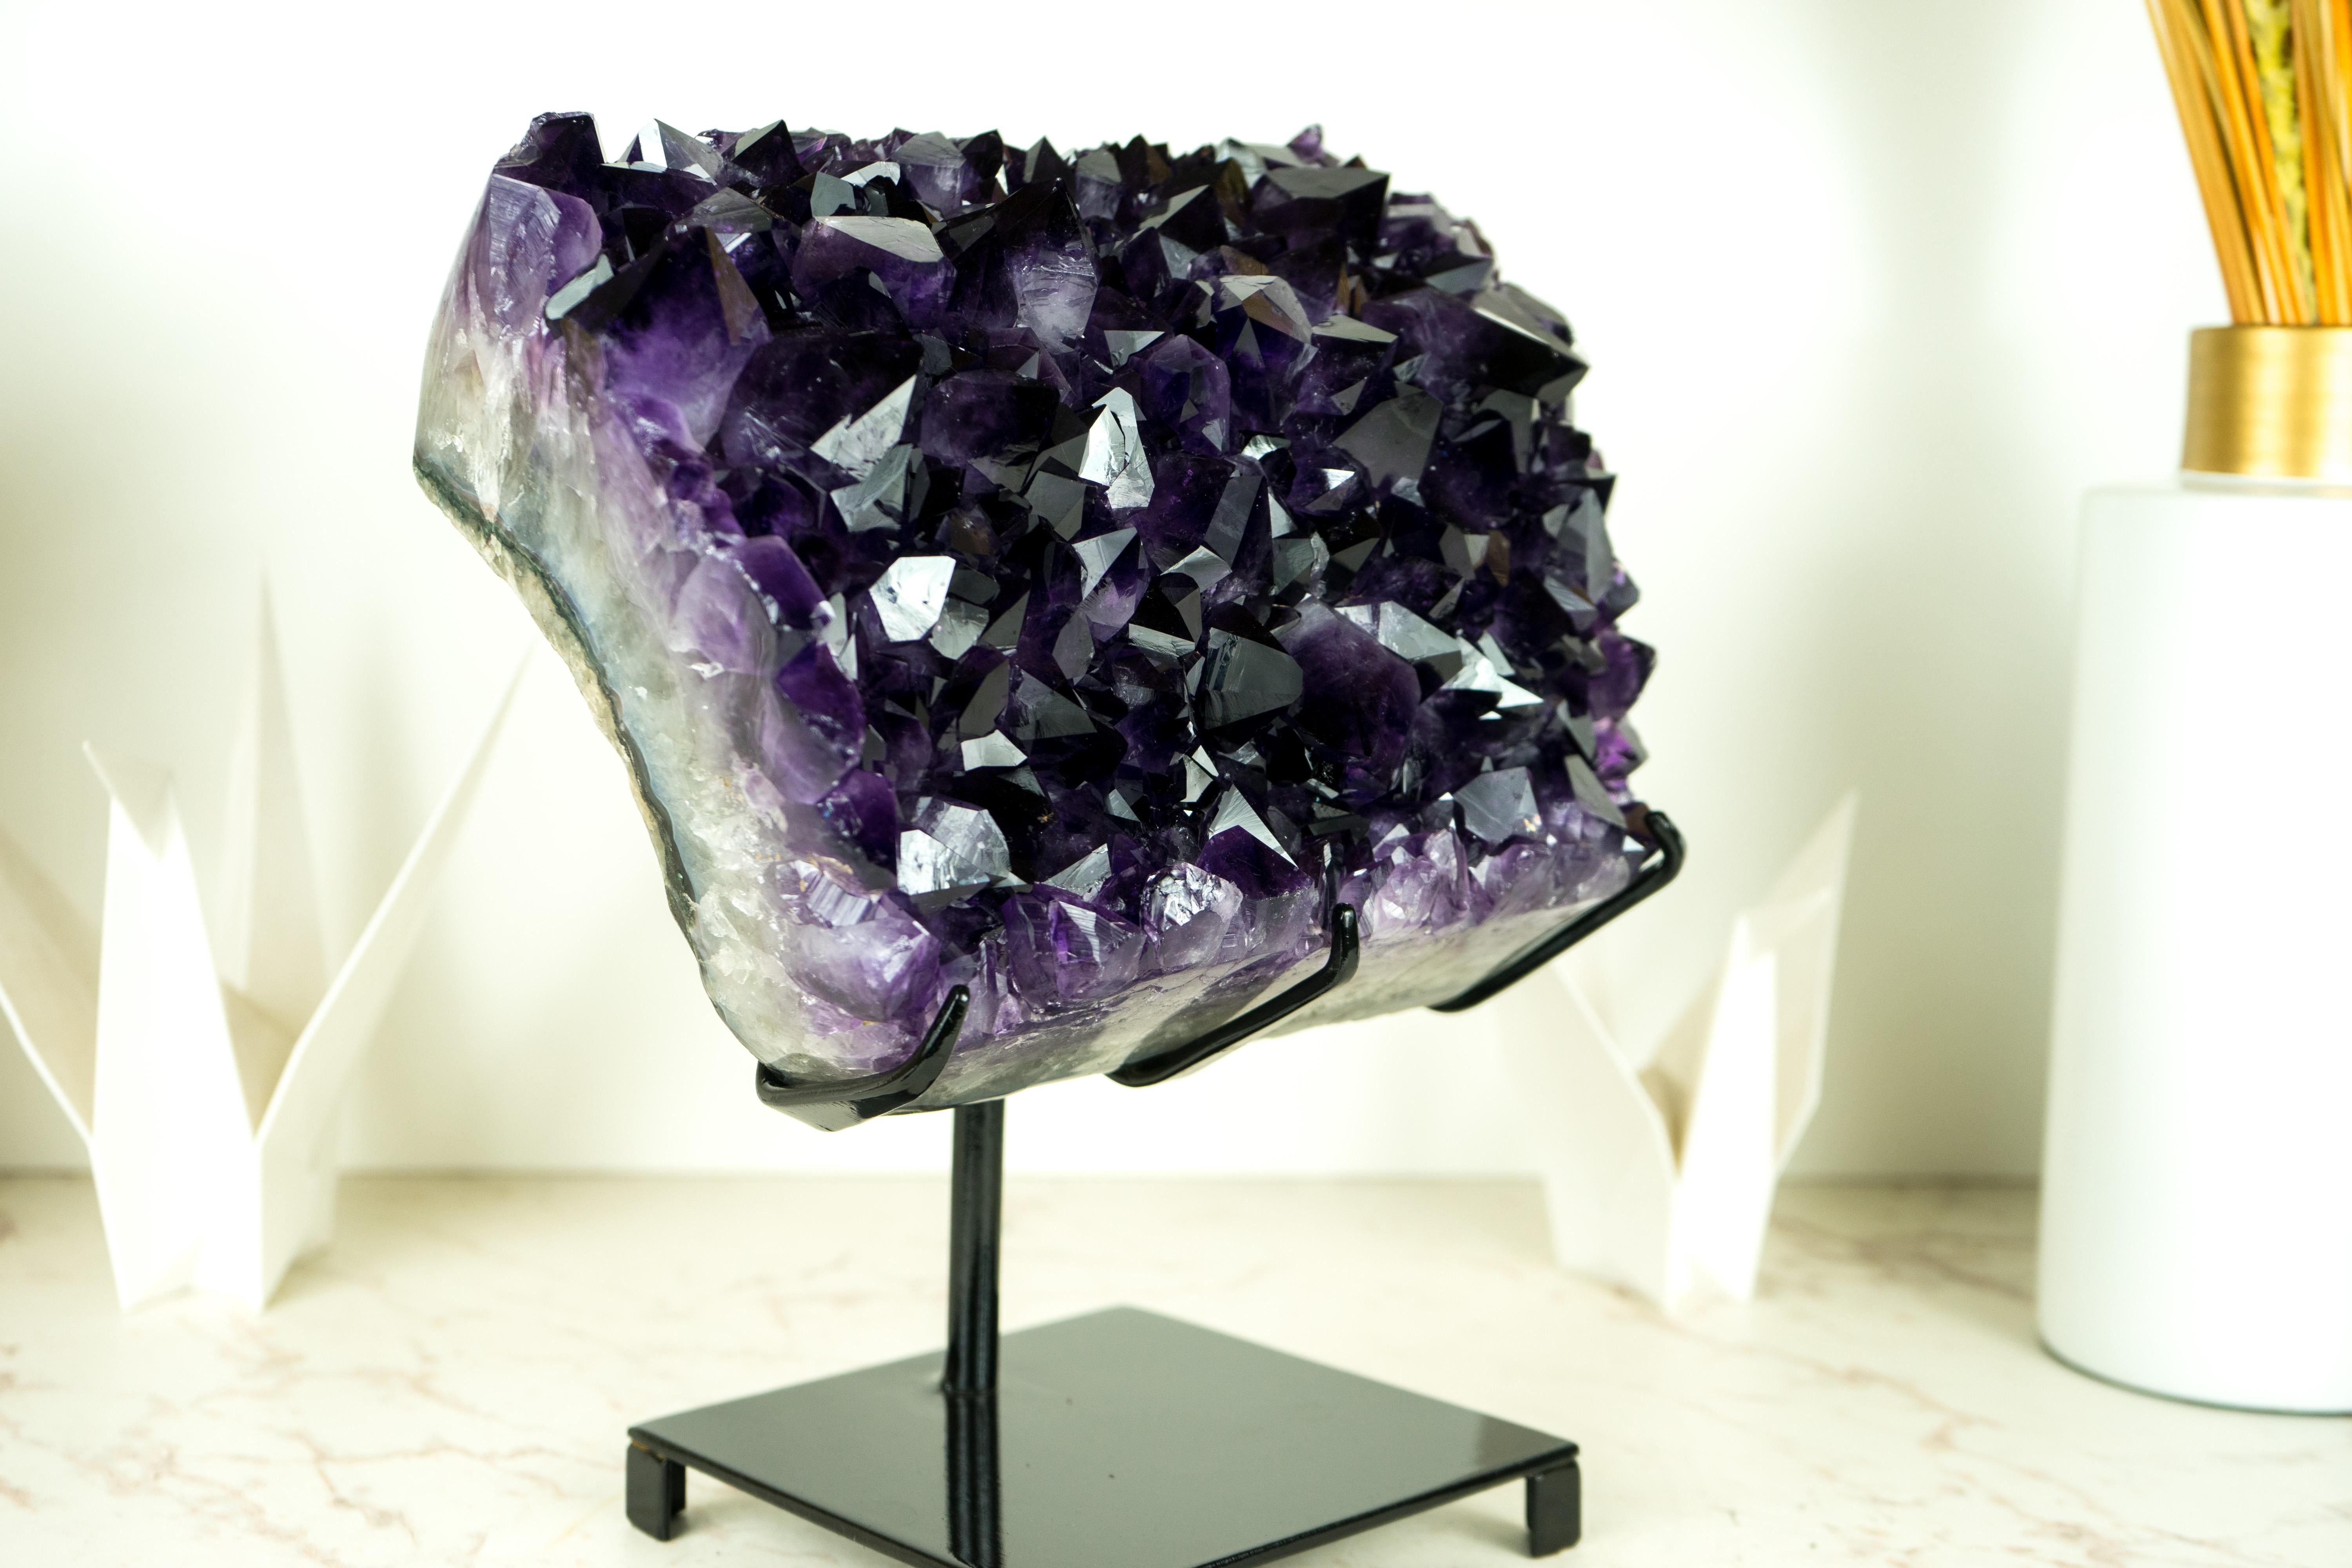 Superb Large, Deep Purple Amethyst Cluster with Intact Large AAA Saturated Amethyst Druzy 

▫️ Description

A gallery-grade amethyst cluster delivers world-class aesthetics, making it the centerpiece of your collection. This amethyst features large,